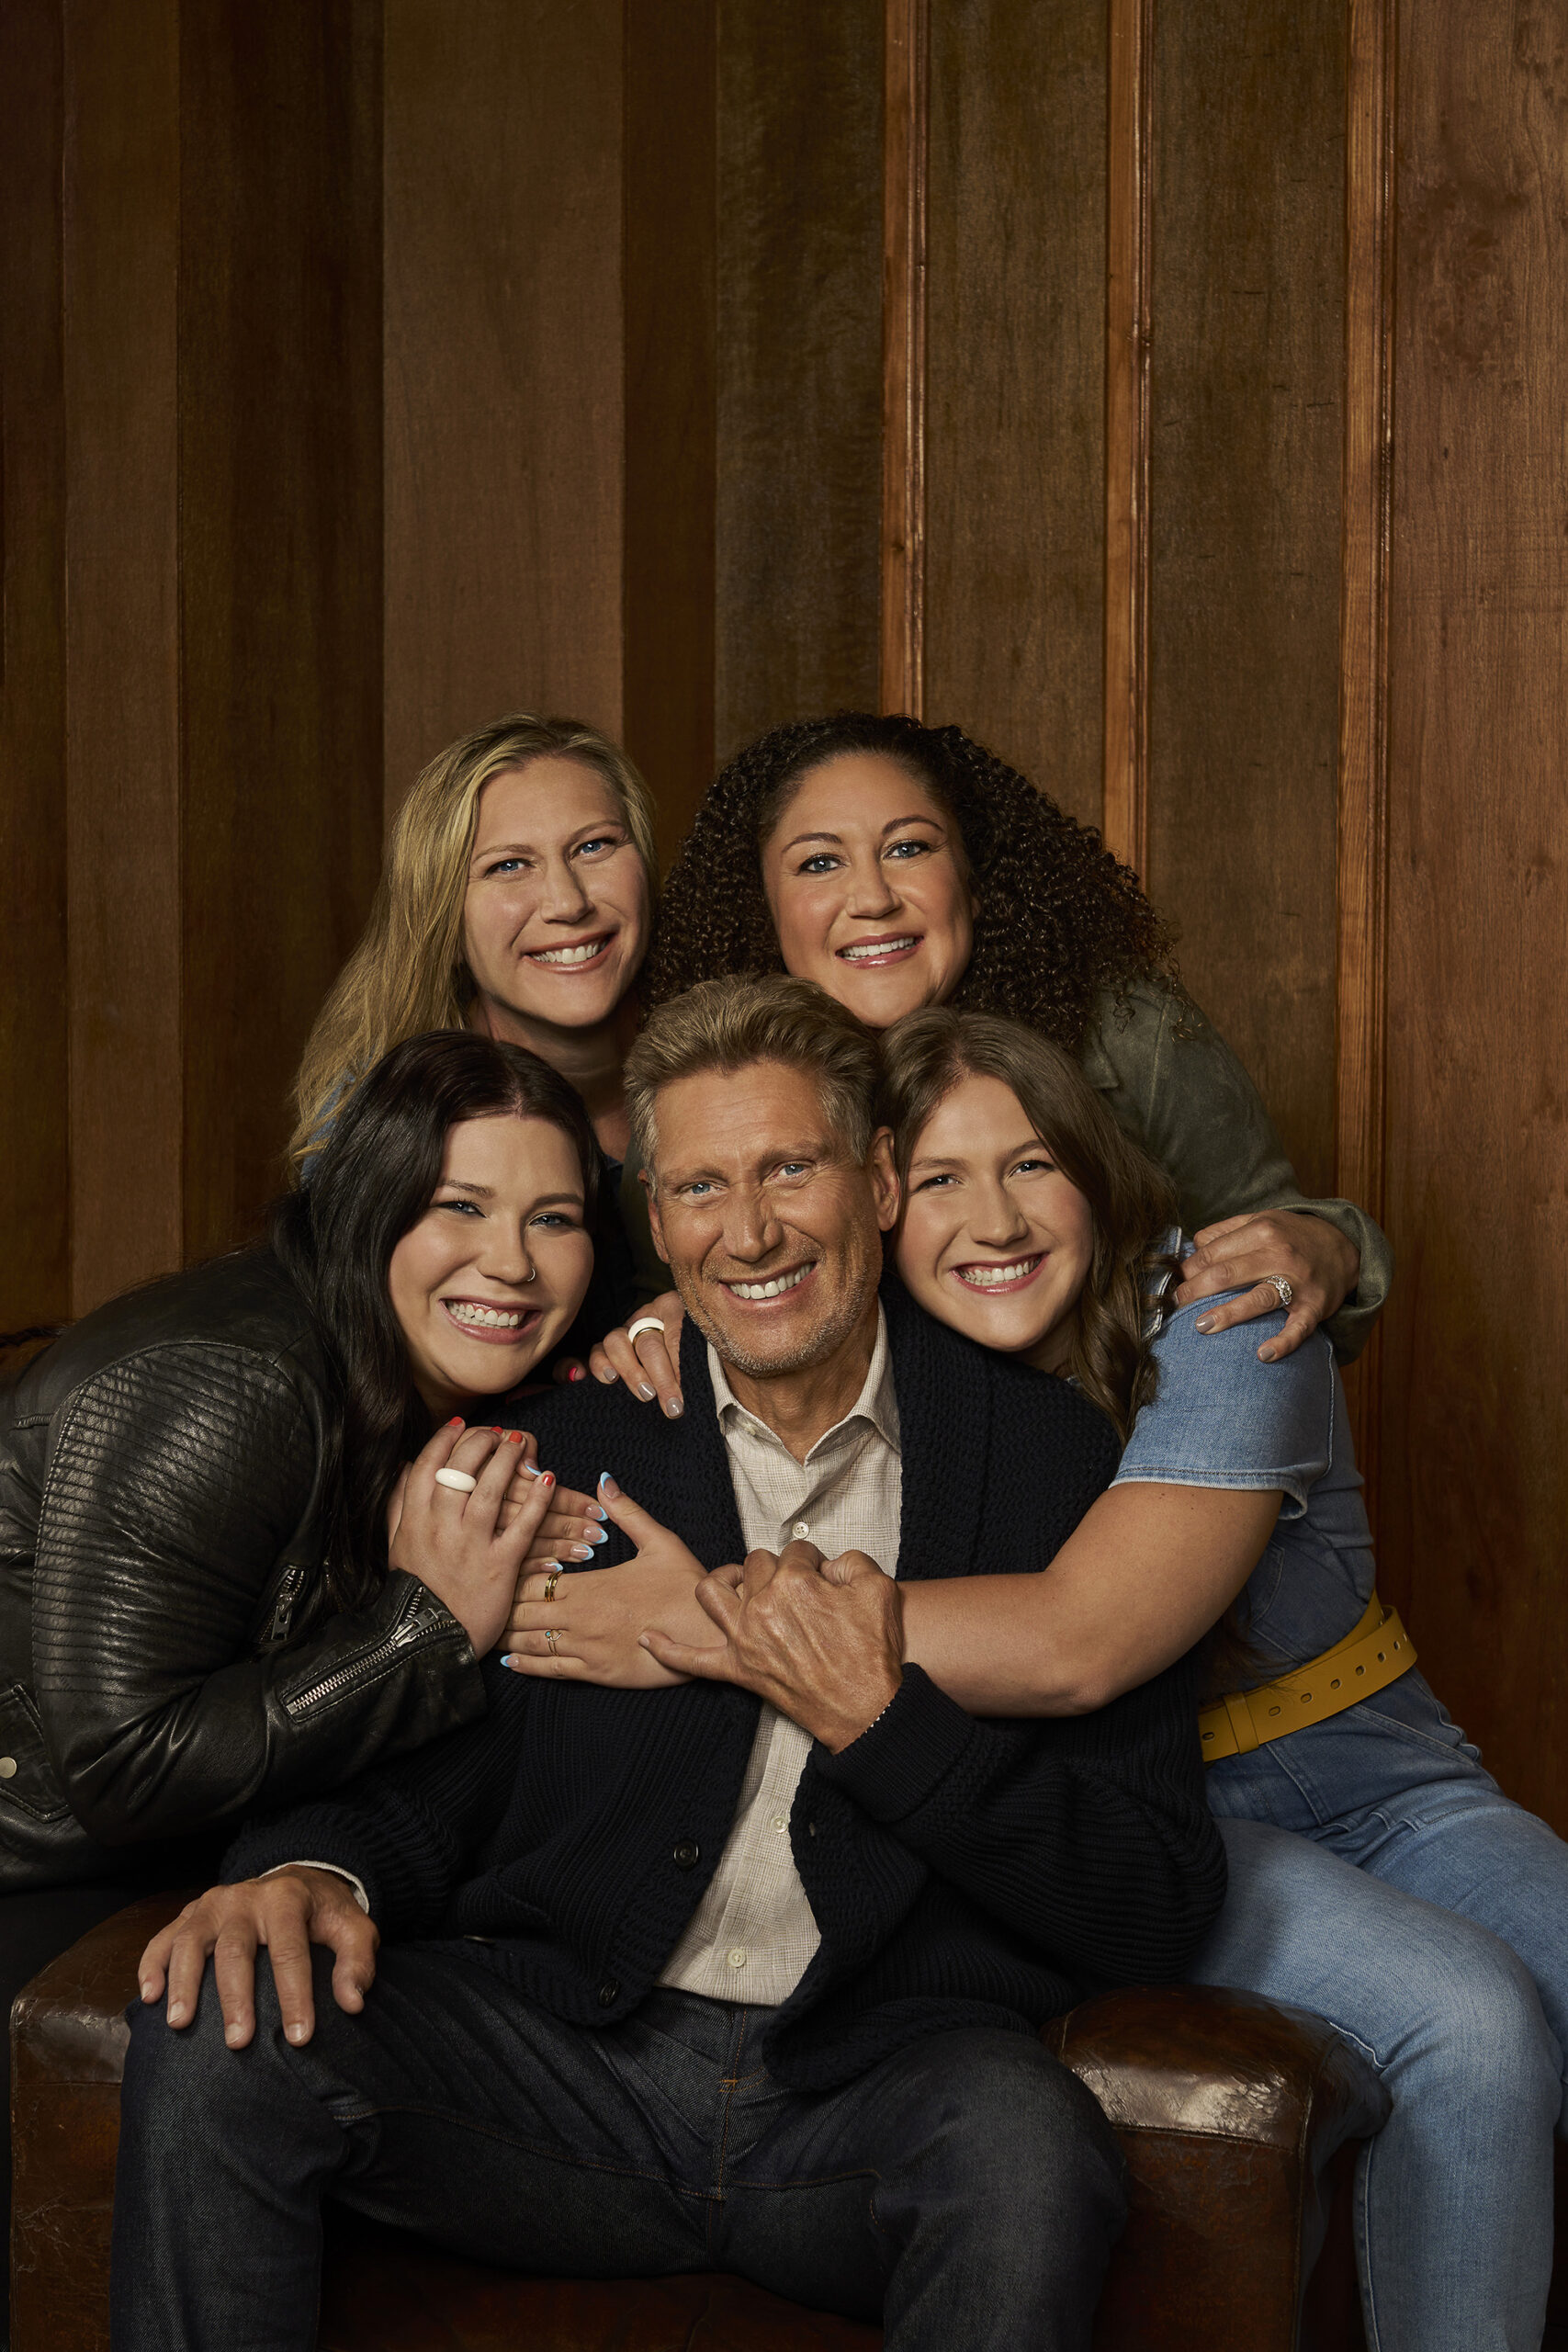 promotional photo for ABC's "The Golden Bachelor." Golden Bachelor Gerry Turner is seated, and surrounding him, and giving him hugs, are his two daughters and two granddaughters.